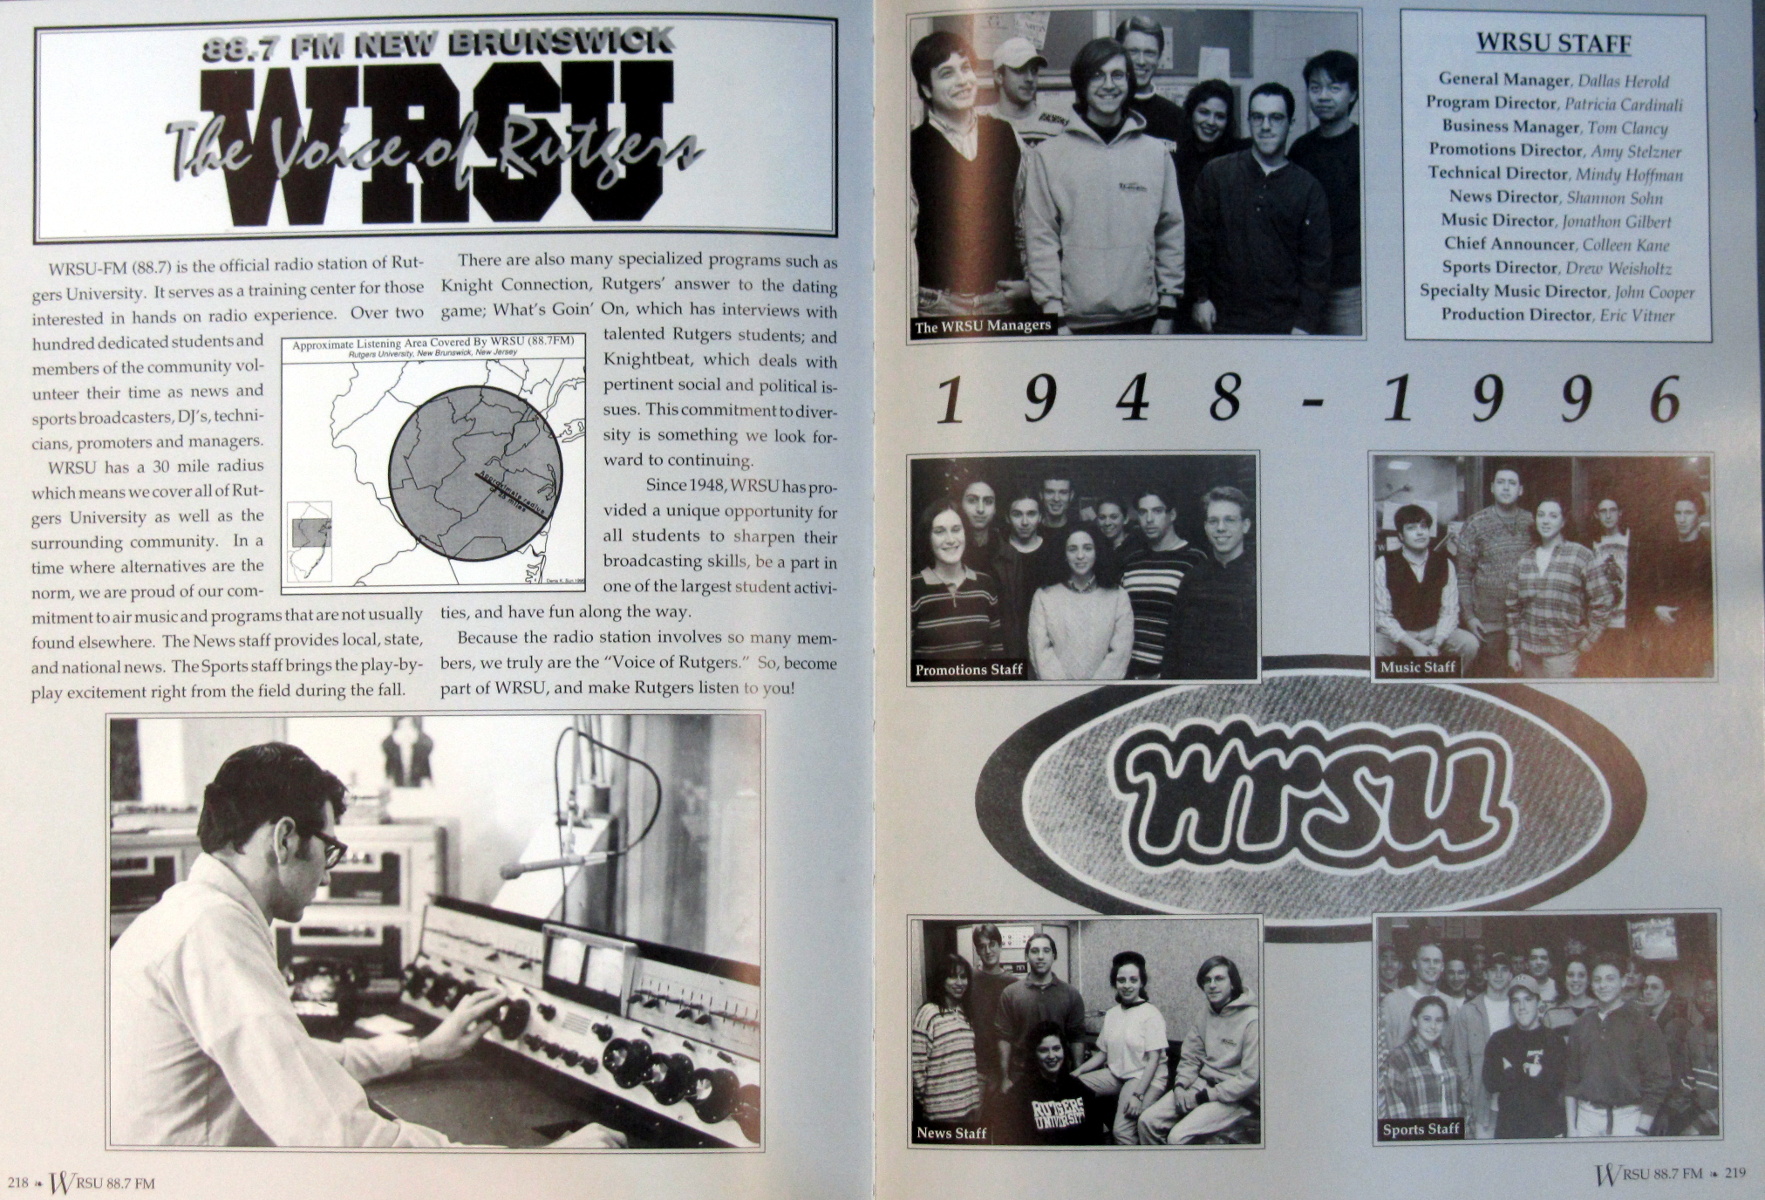 WRSU in the 1996 Yearbook - The picture on the left bottom is from the EARLY seventies. Not 1996. Note the dual cart racks.